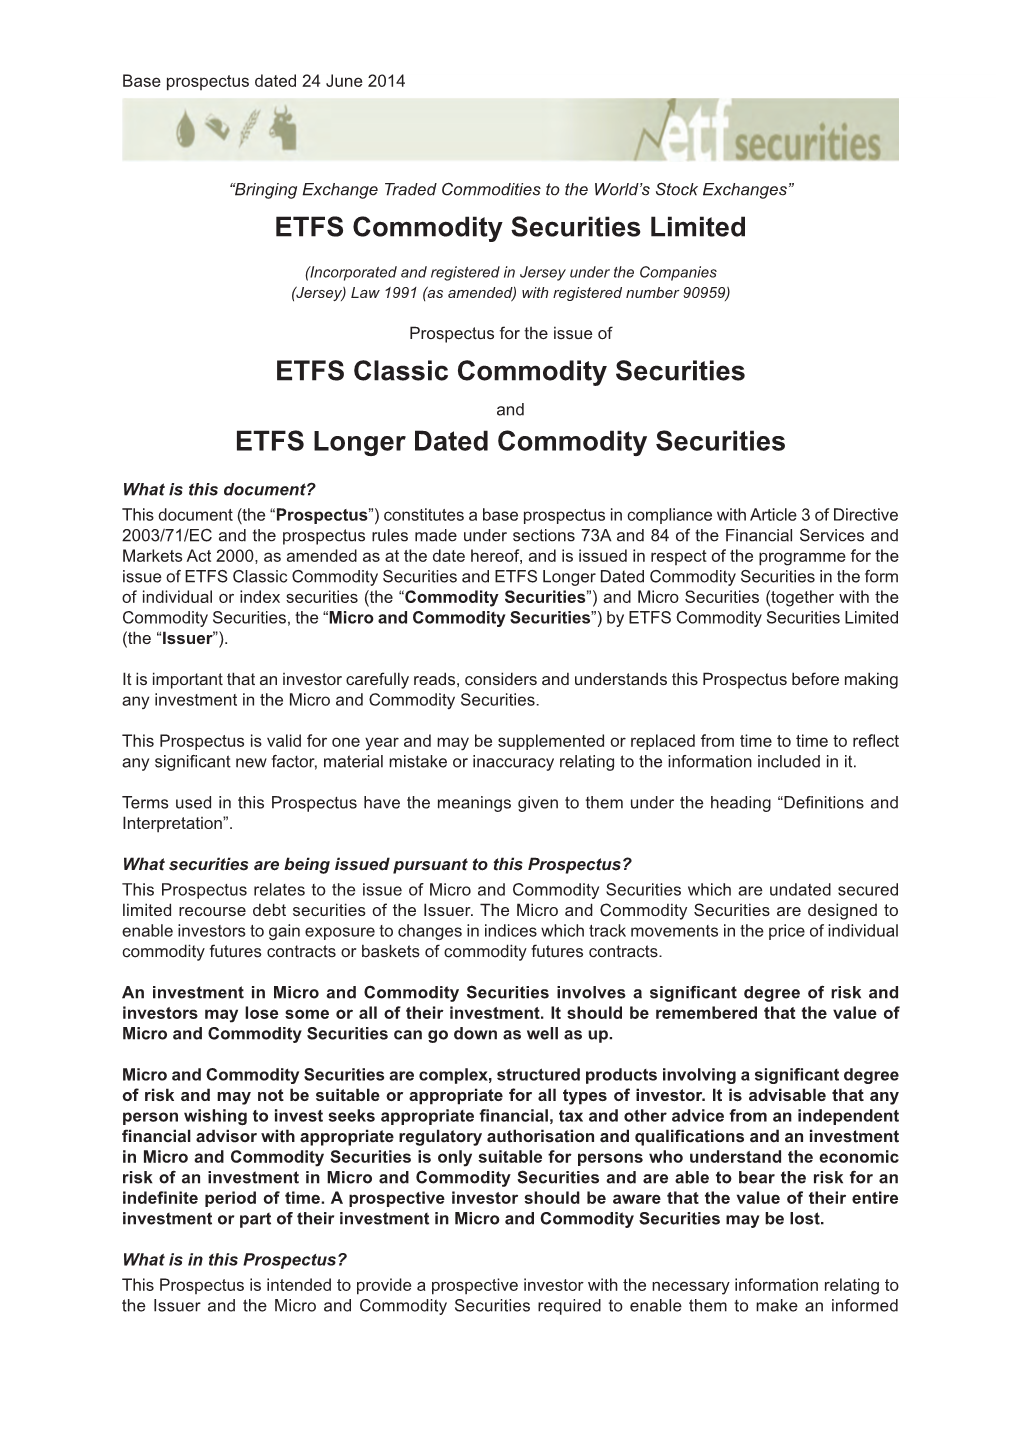 ETFS Commodity Securities Limited